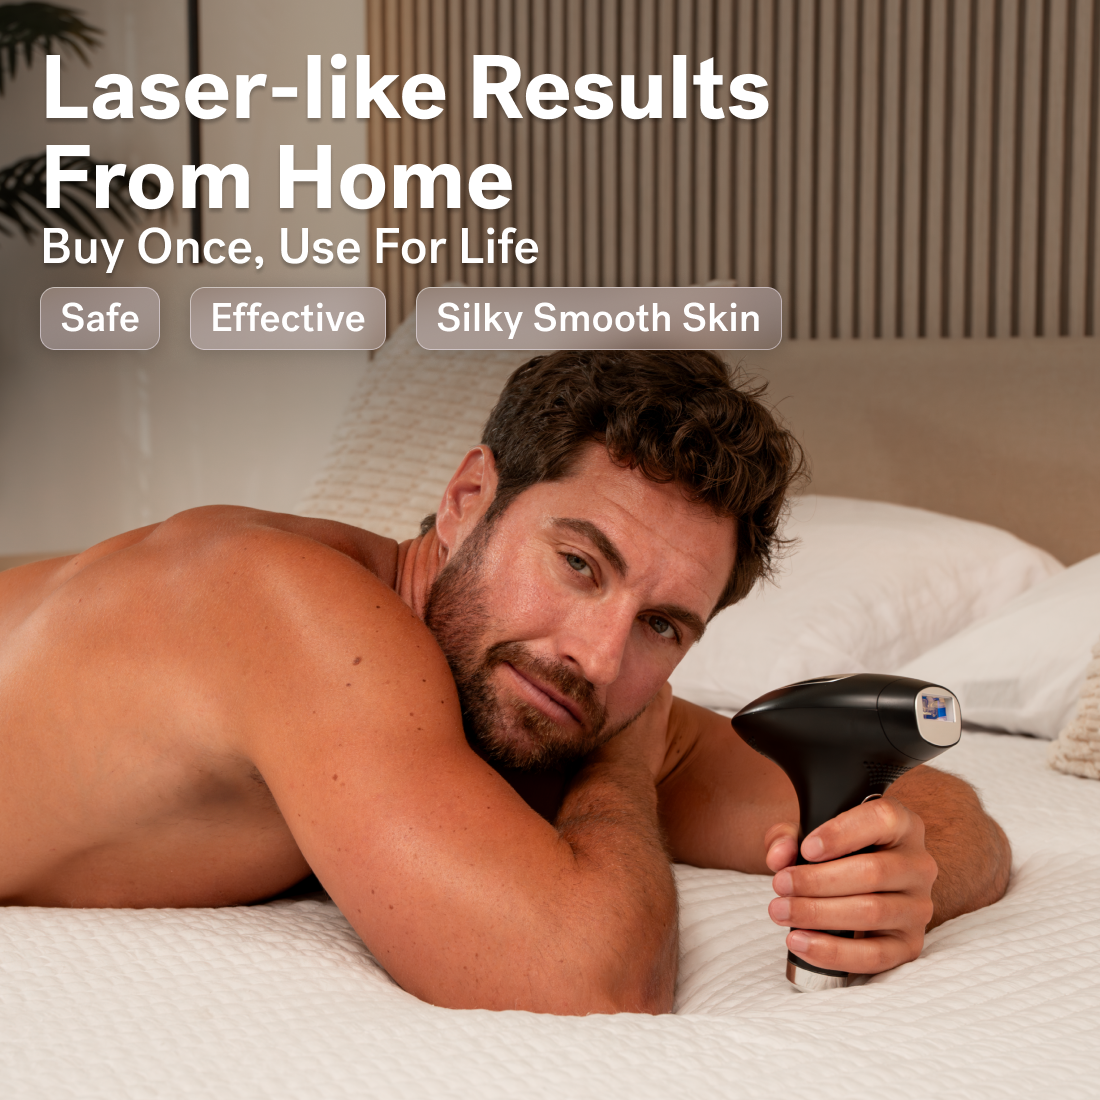 Black - A man lies on a bed holding a handheld device. The text reads, "Laser-like Results From Home with Lumos IPL and COOLMAX cooling technology by Michael Todd Beauty. Buy Once, Use For Life. Safe, Effective Hair Removal for Silky Smooth Skin.